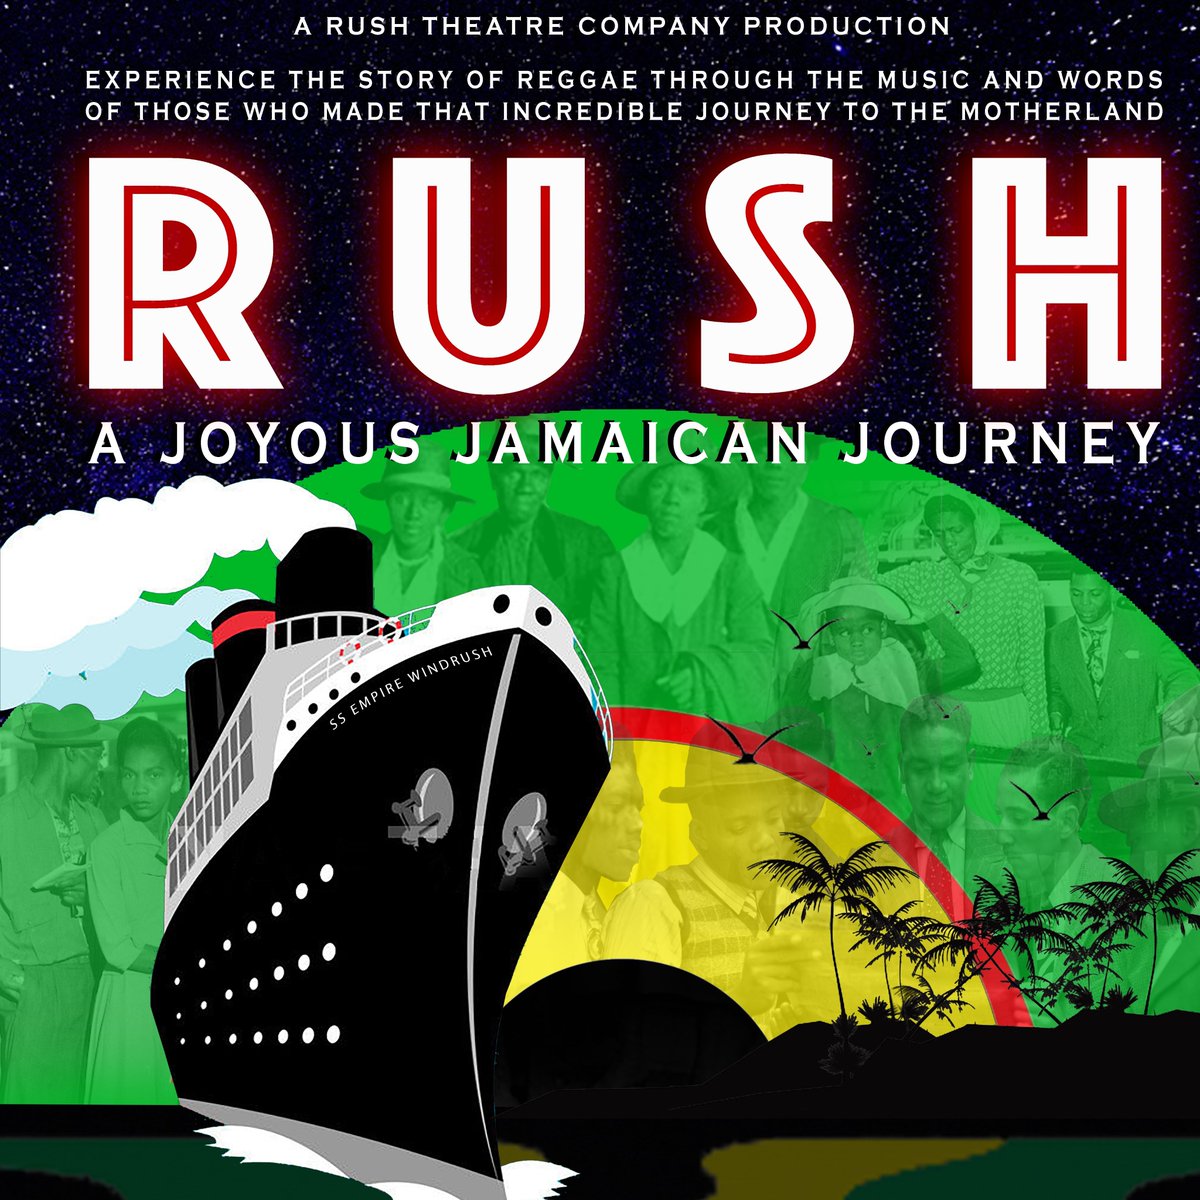 Sat 11 May at The Hexagon...
RUSH: A Joyous Jamaican Journey
whatsonreading.com/venues/hexagon…

An incredible narrated musical that tells the story of the Windrush Generation and Reggae...
‘This is unmissable’ STAGE TALK MAGAZINE

@RDGWhatsOn @EventsInReading @RdgToday @Rush_TheatreCo